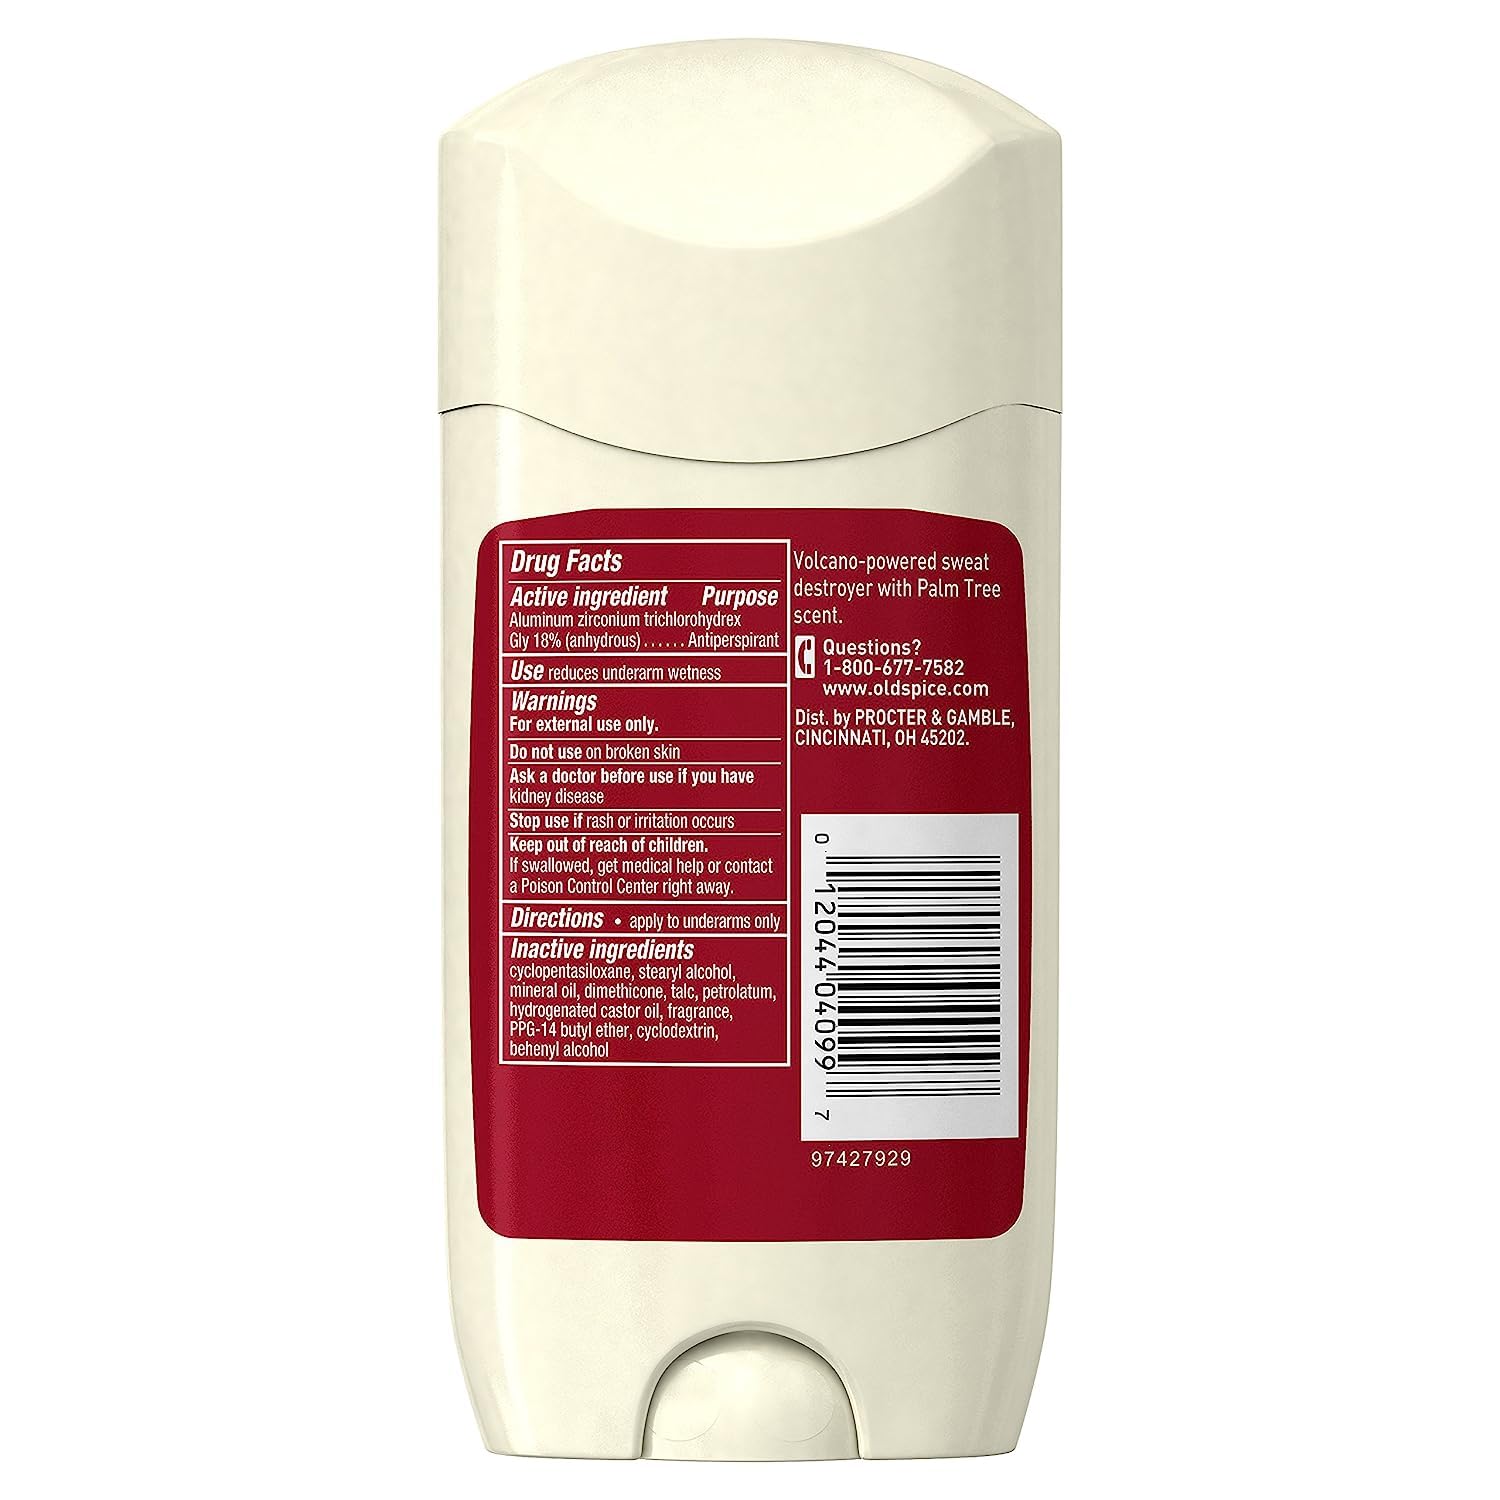 Old Spice Fresher Collection Men's Anti-Perspirant and Deodorant, Fiji Scent - 3.4 Oz